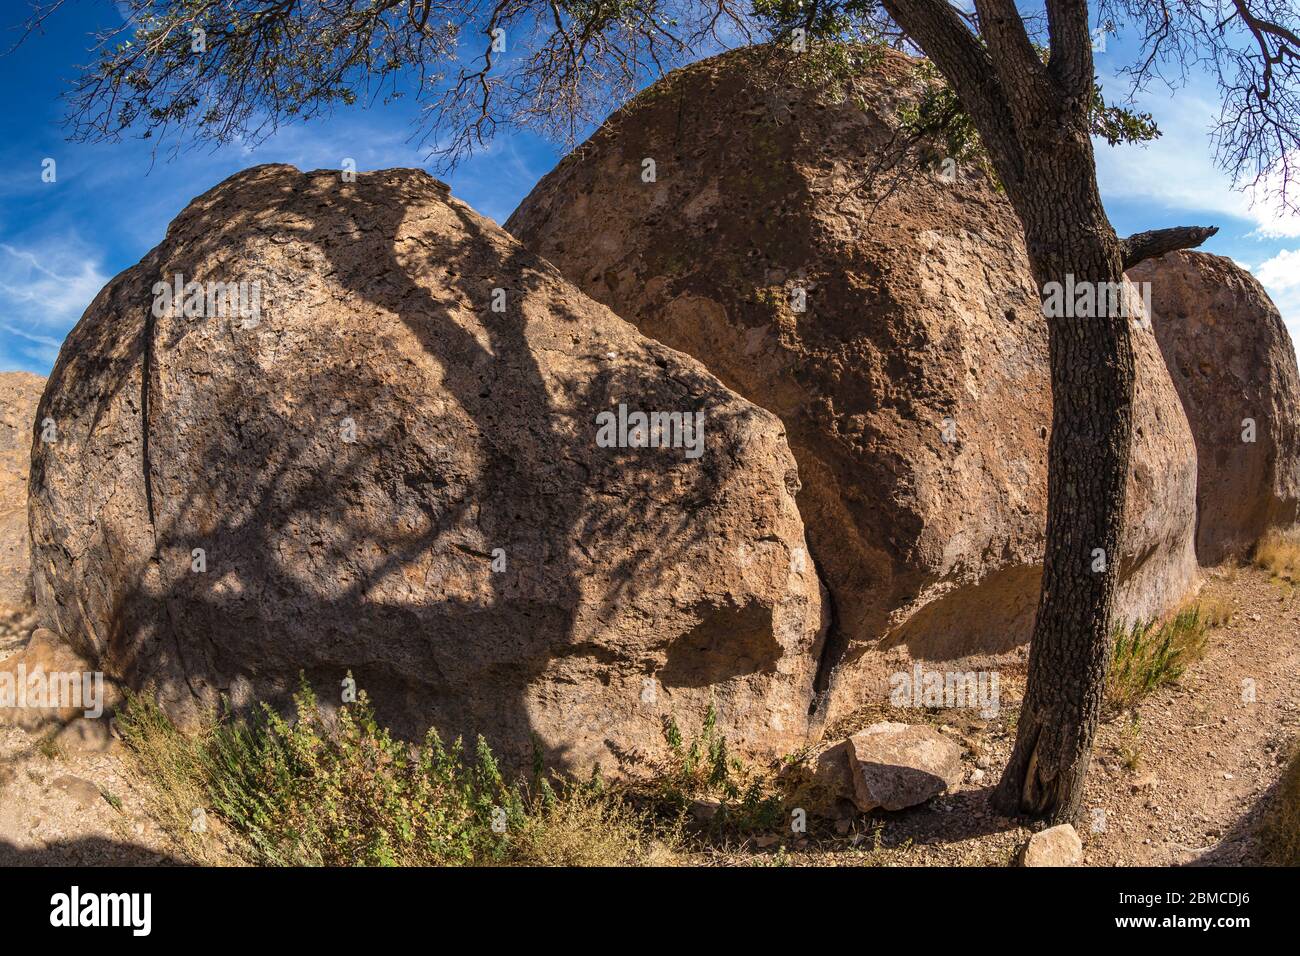 Oak tree limb and shadows on the volcanic rock formations of City of Rocks State Park, located between Silver City and Deming in the Chihuahuan Desert Stock Photo